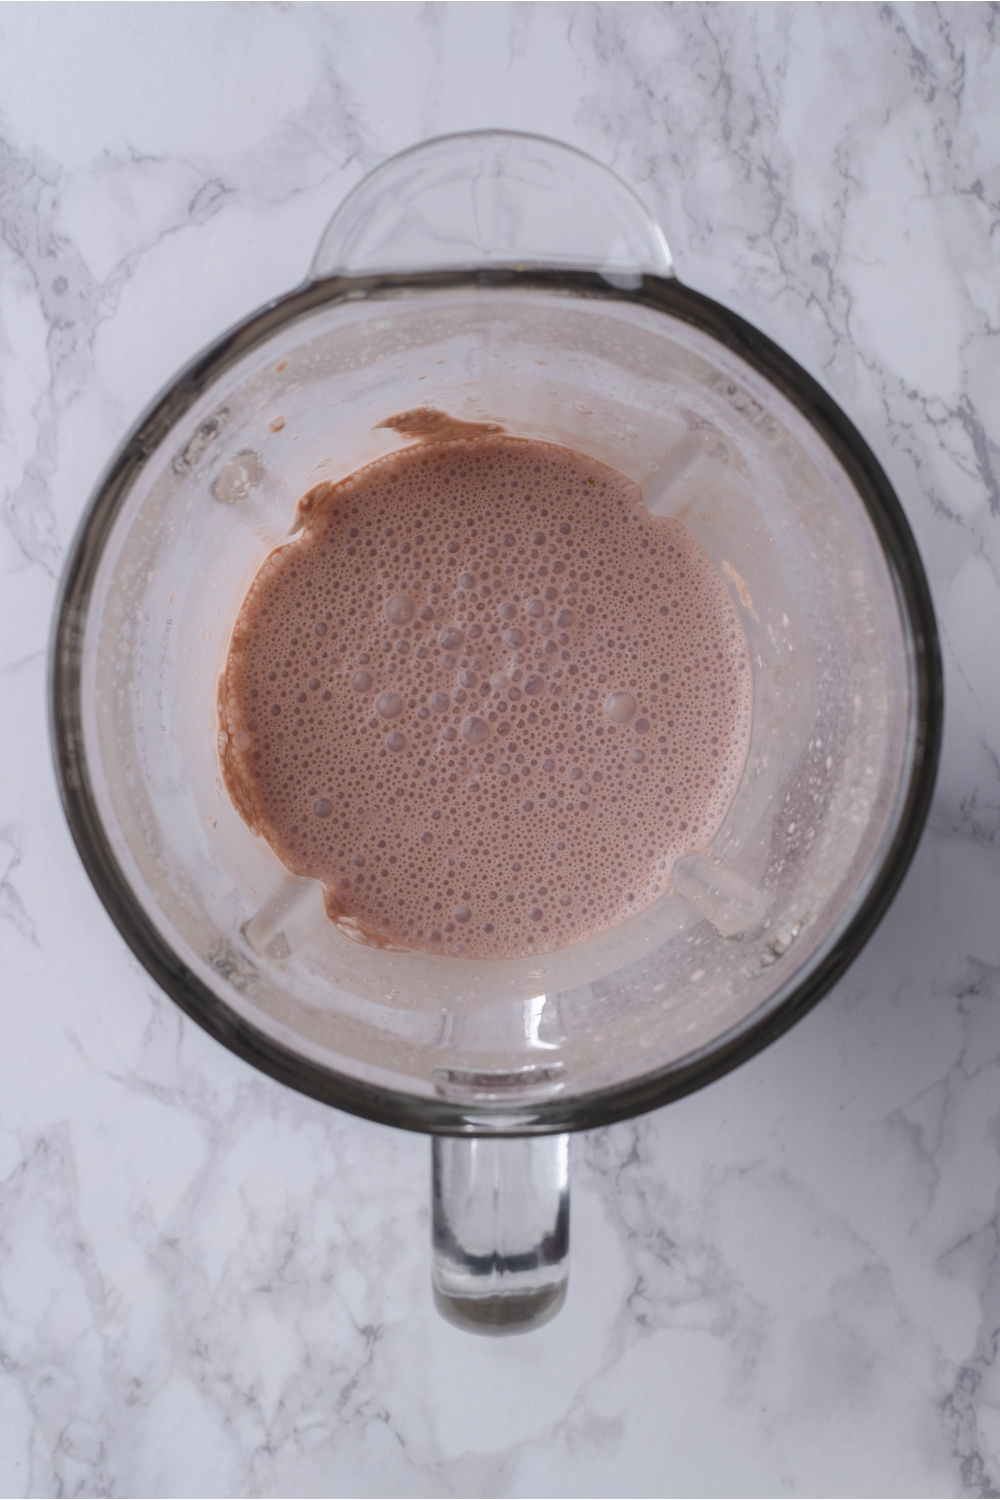 Overhead view of a blender with a chocolate milk mixture in it.